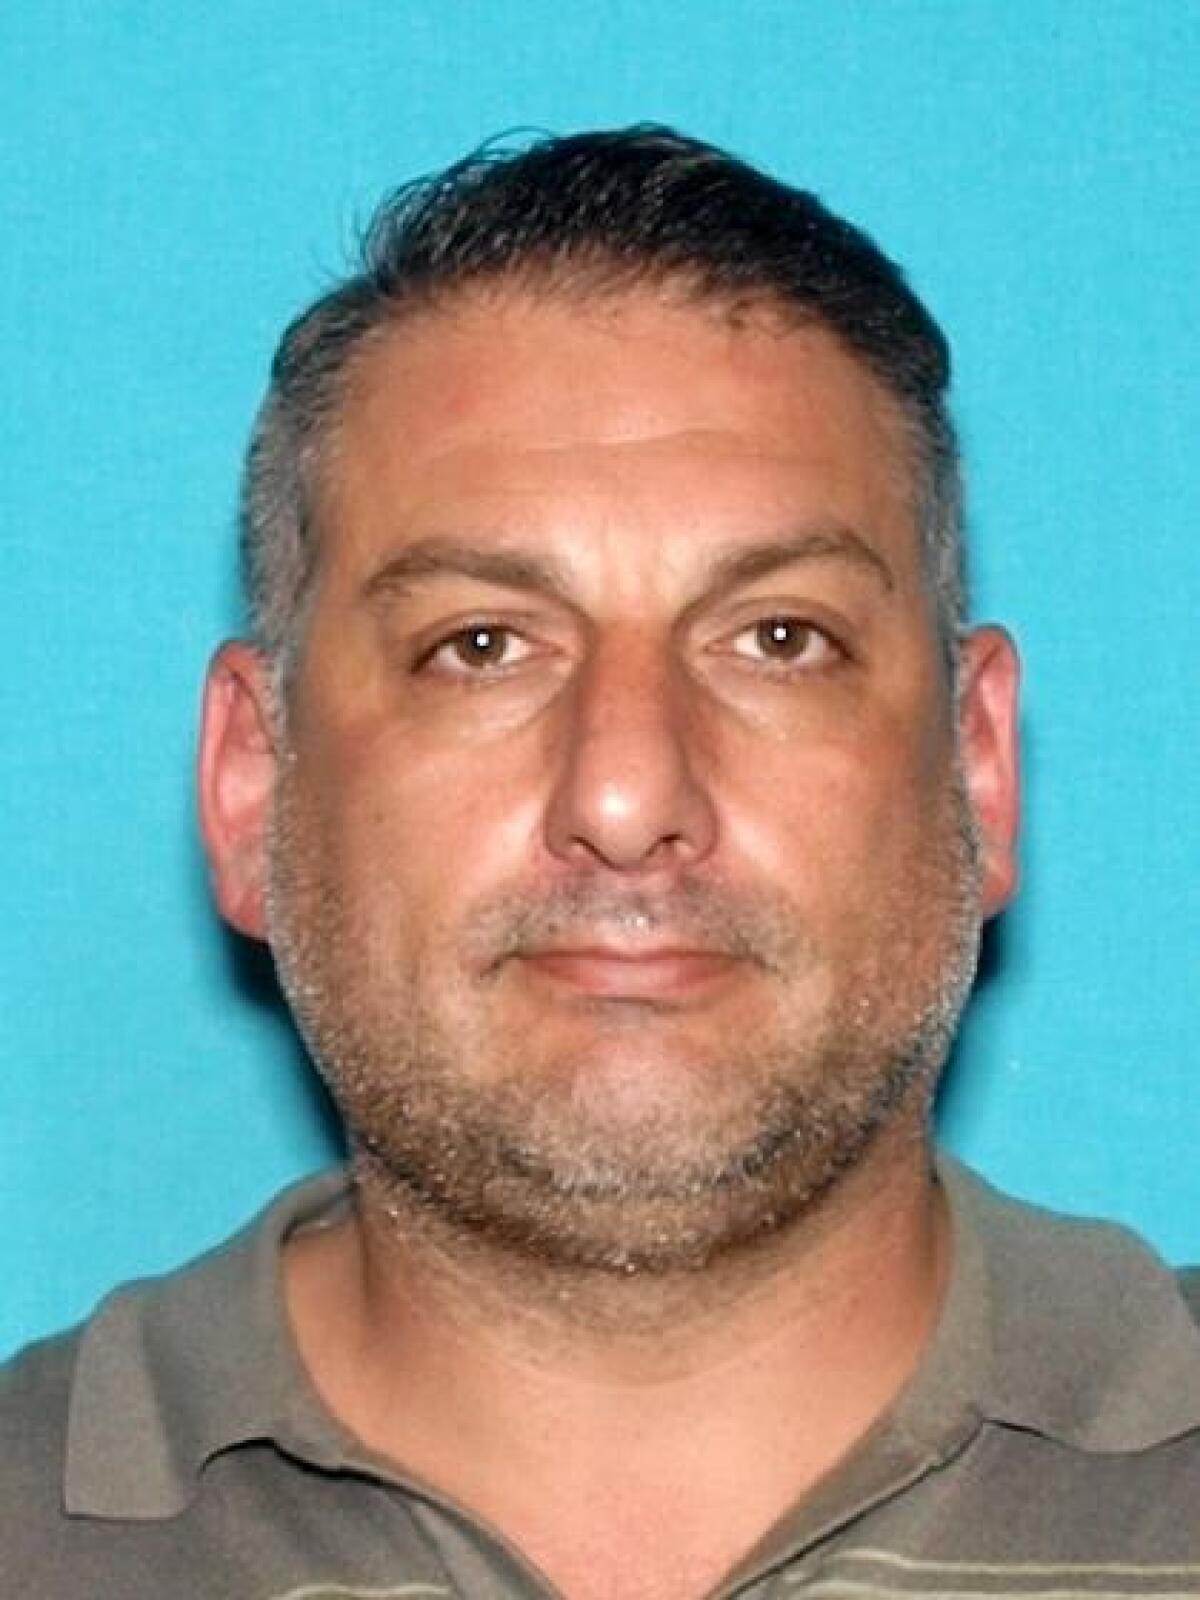 Roy "Beau" Barnhart, 43, was arrested on Tuesday by Huntington Beach police on suspicion of sexually assaulting a minor.